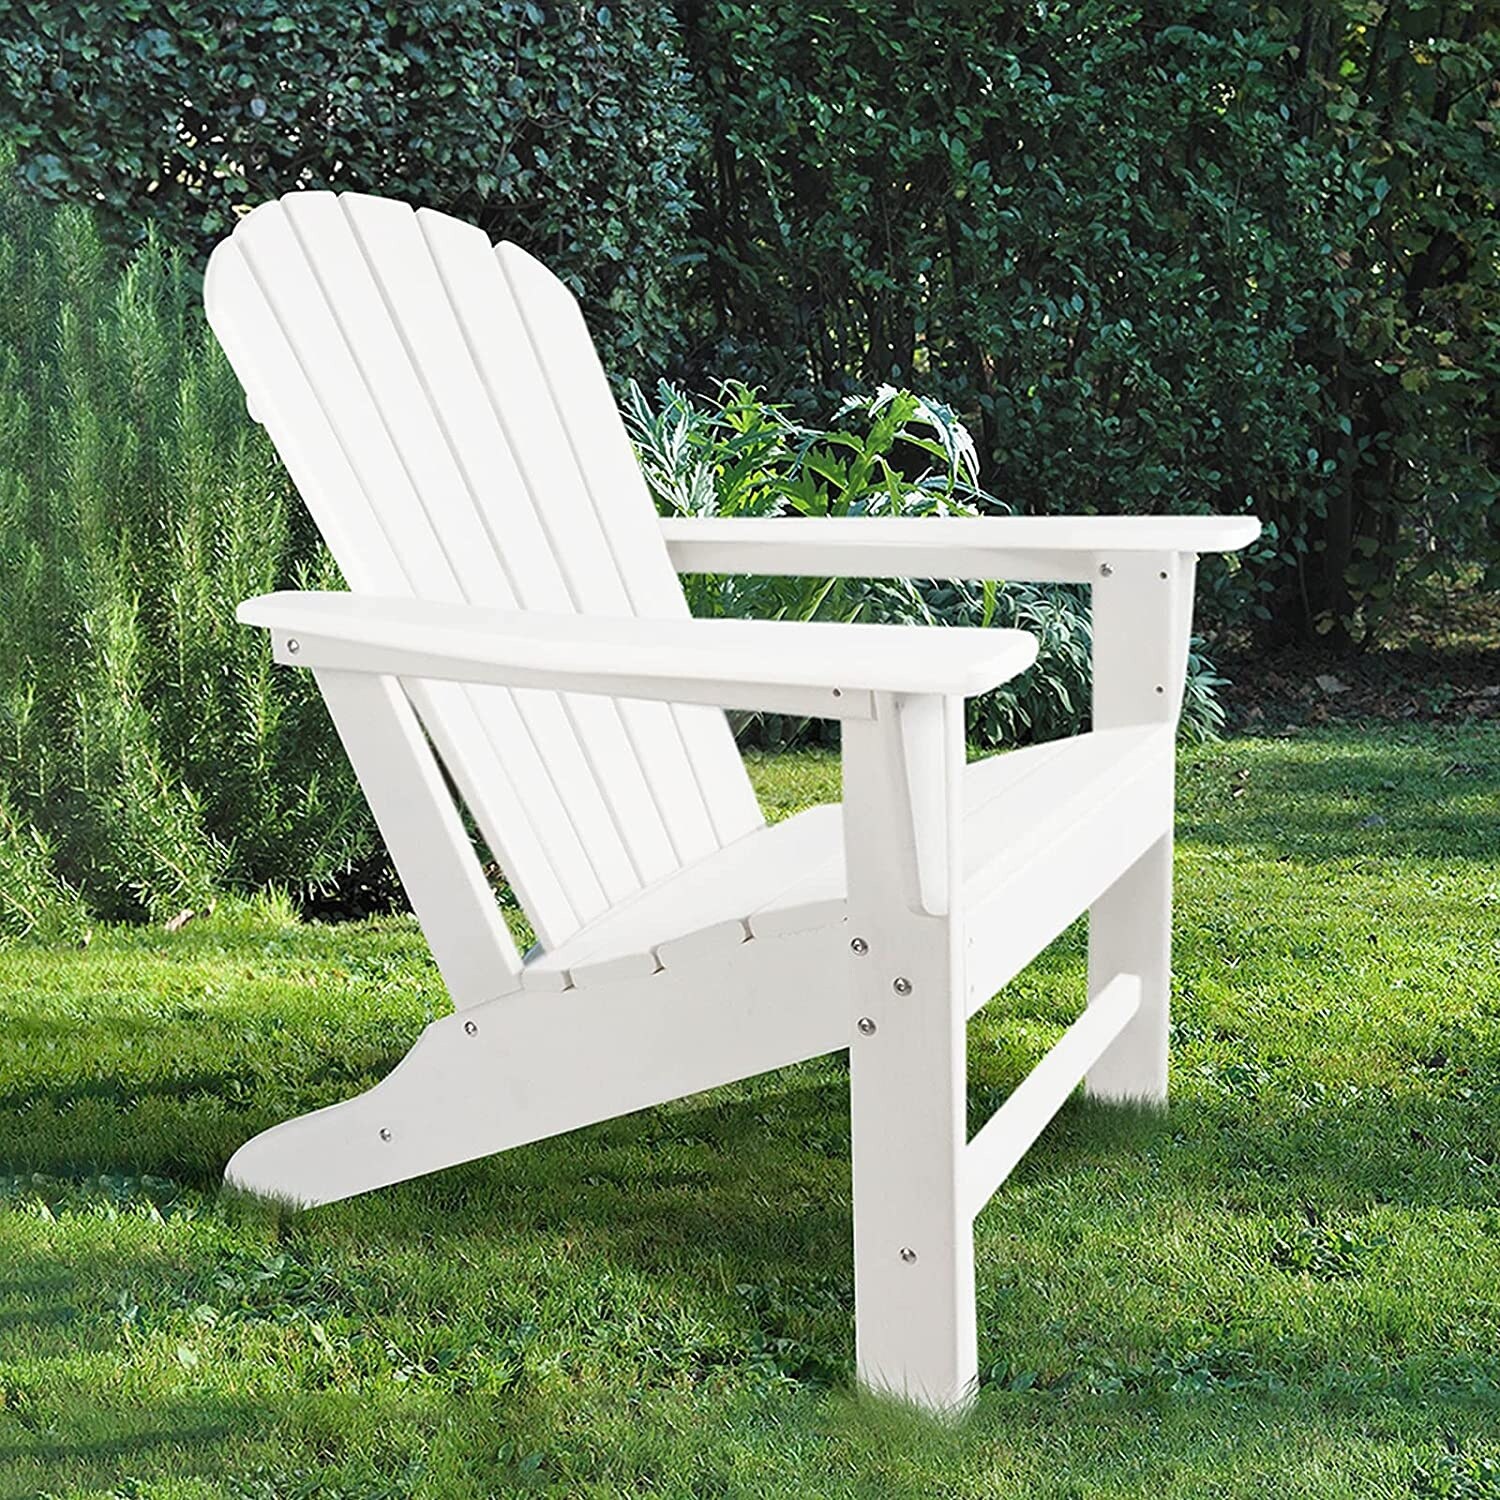 HDPE Resin Wood Adirondack Chair Patio Chairs Lawn Chair, Weather Resistant for Garden, Backyard, Beach, Pool & Lawn Furniture